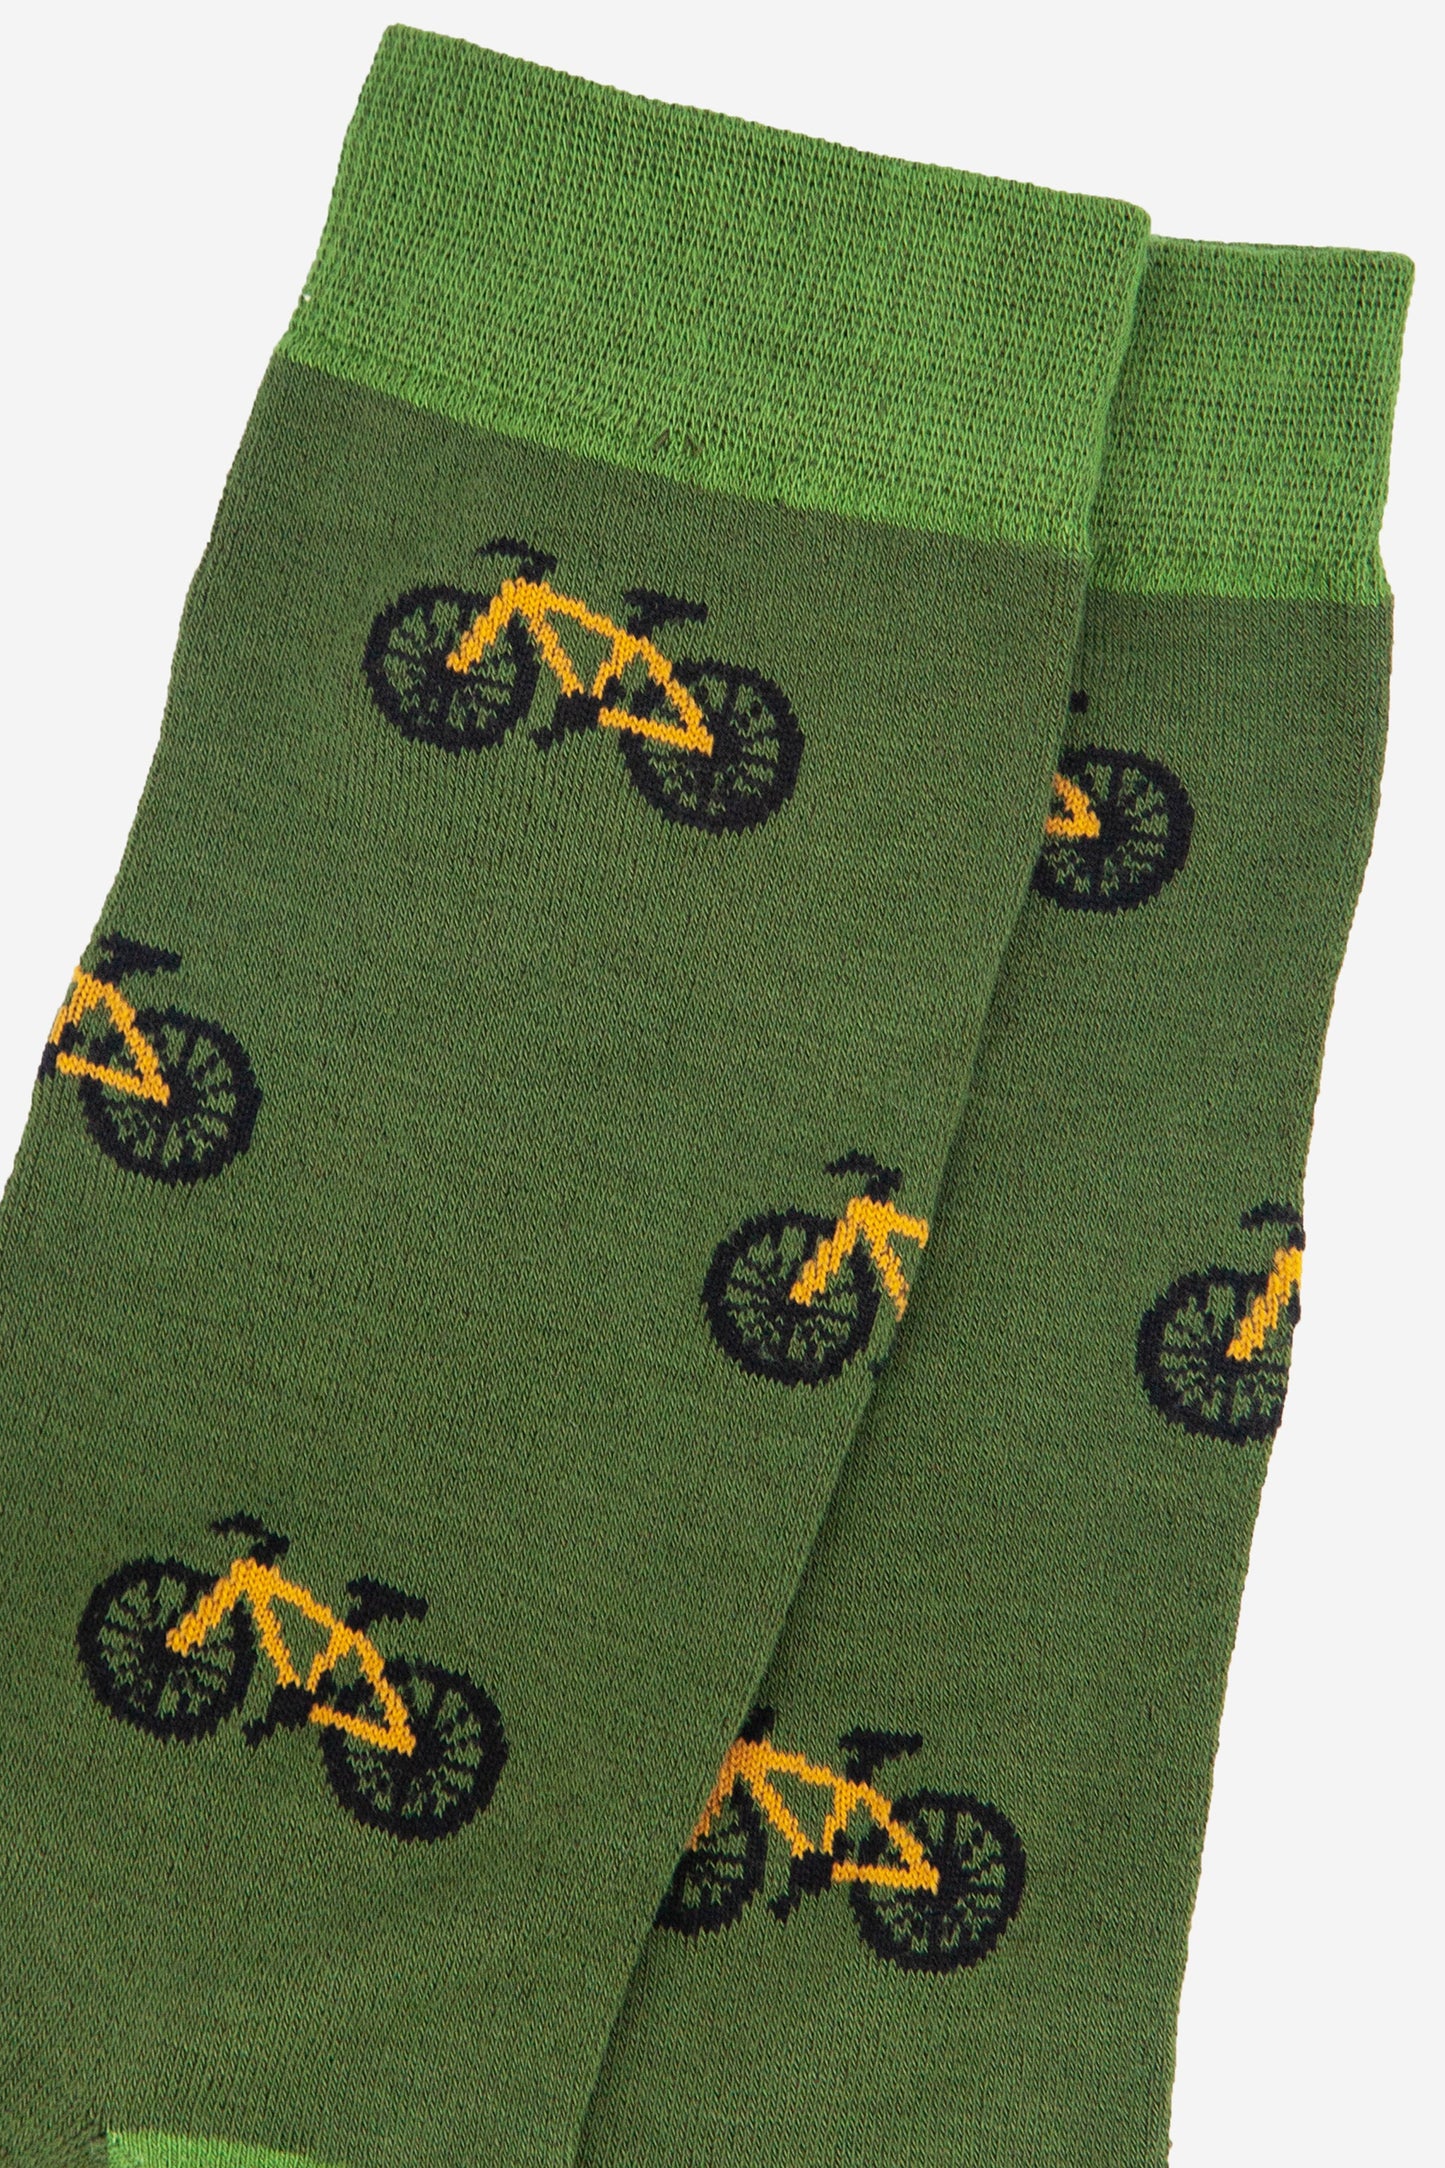 close up of the yellow mountain bike design on the green bamboo socks